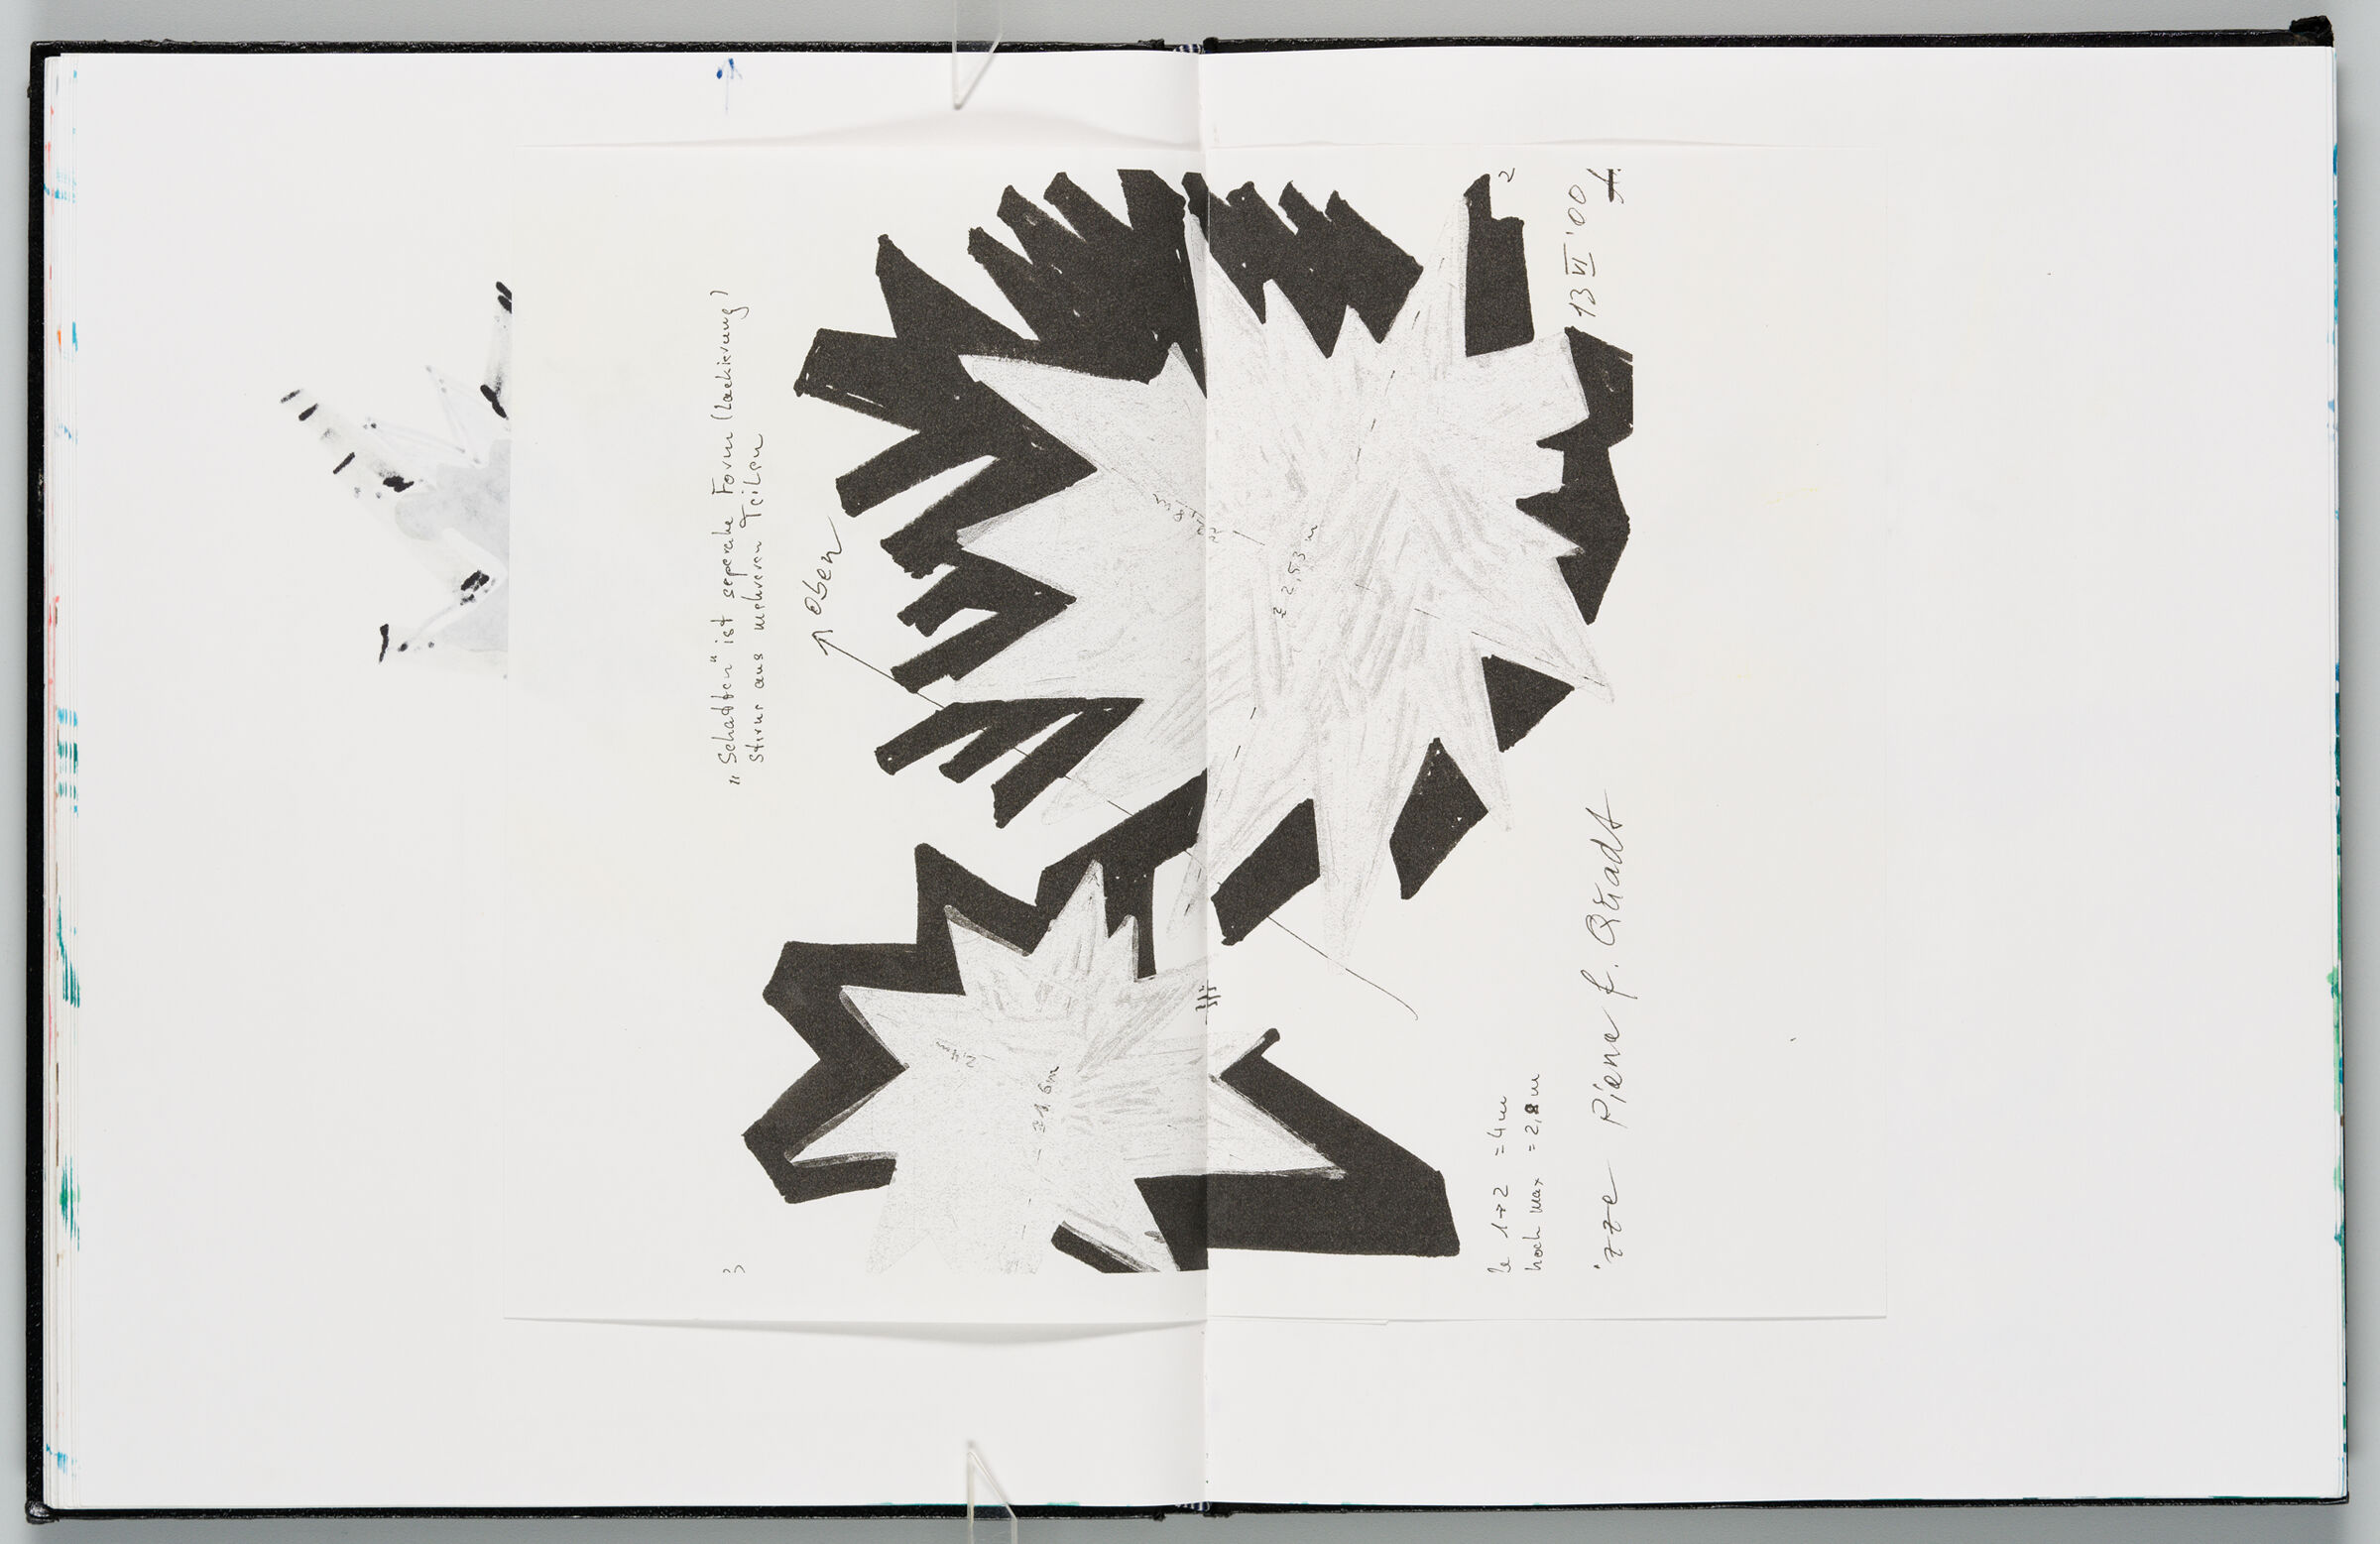 Untitled (Bleed-Through From Previous Page, Left Page); Untitled (Adhered Photocopy Of Inserted Drawing, Right Page)